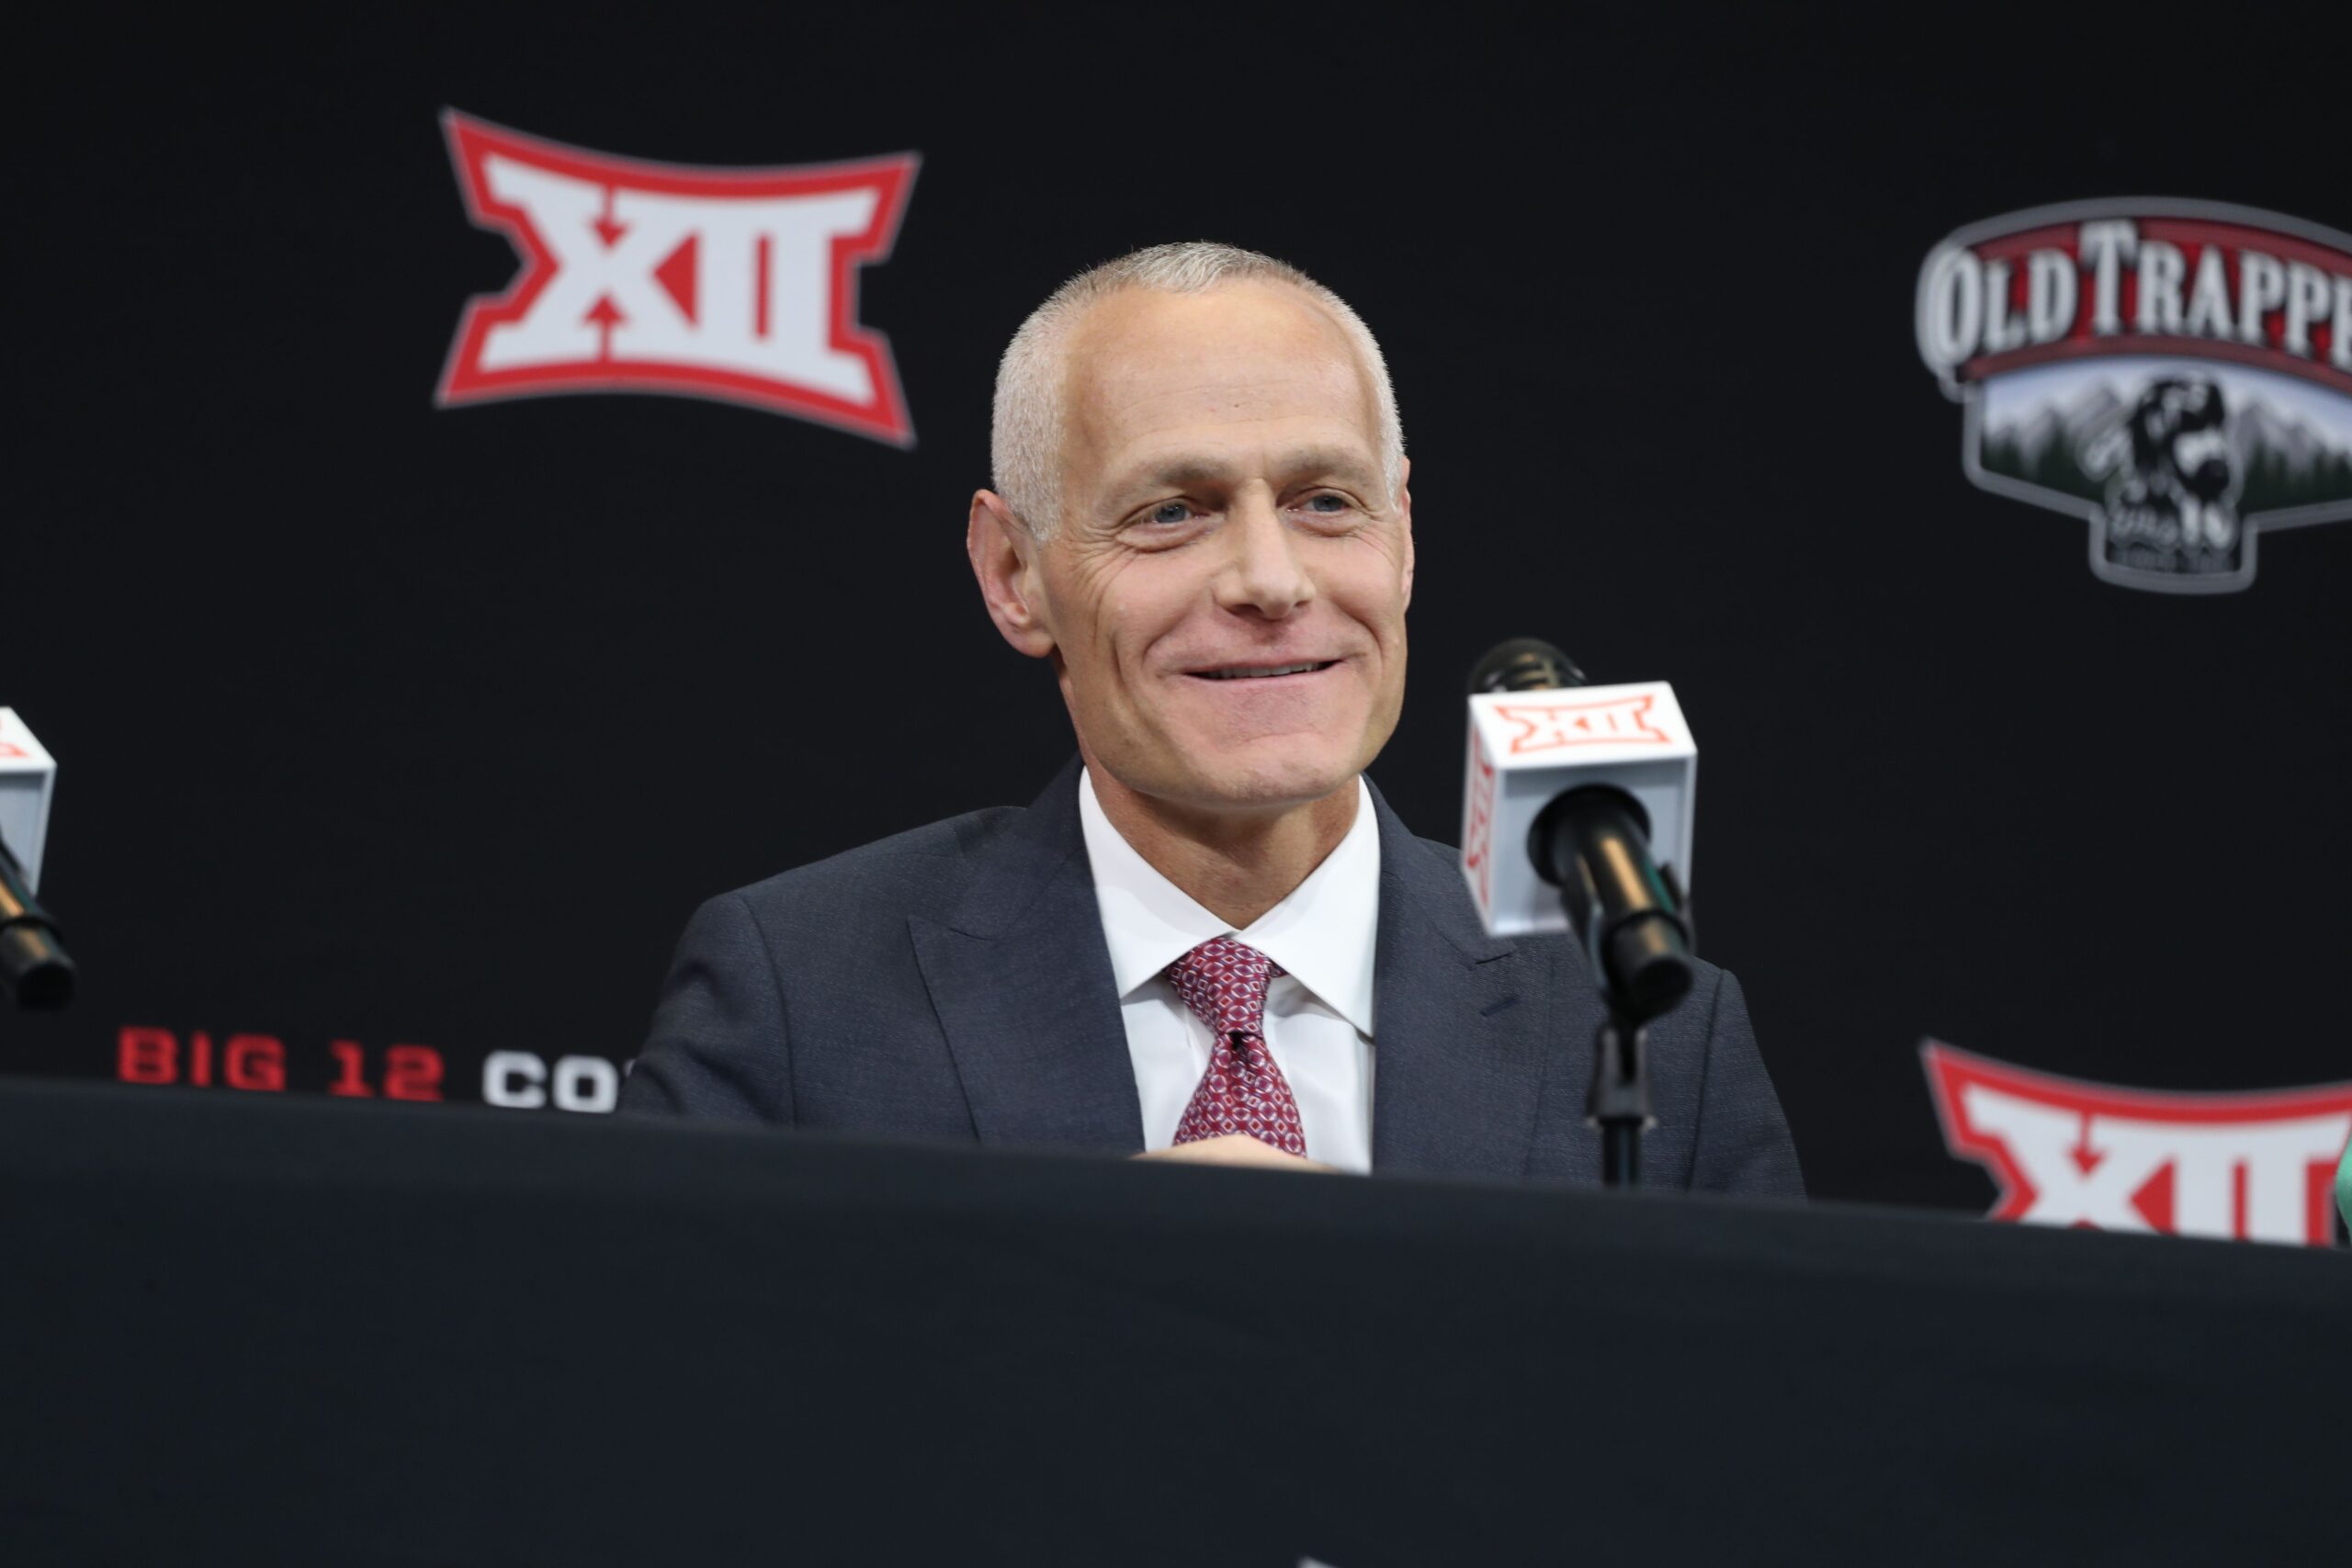 New Commissioner Brett Yormark Ready to “Open Up Business” for the Big 12 